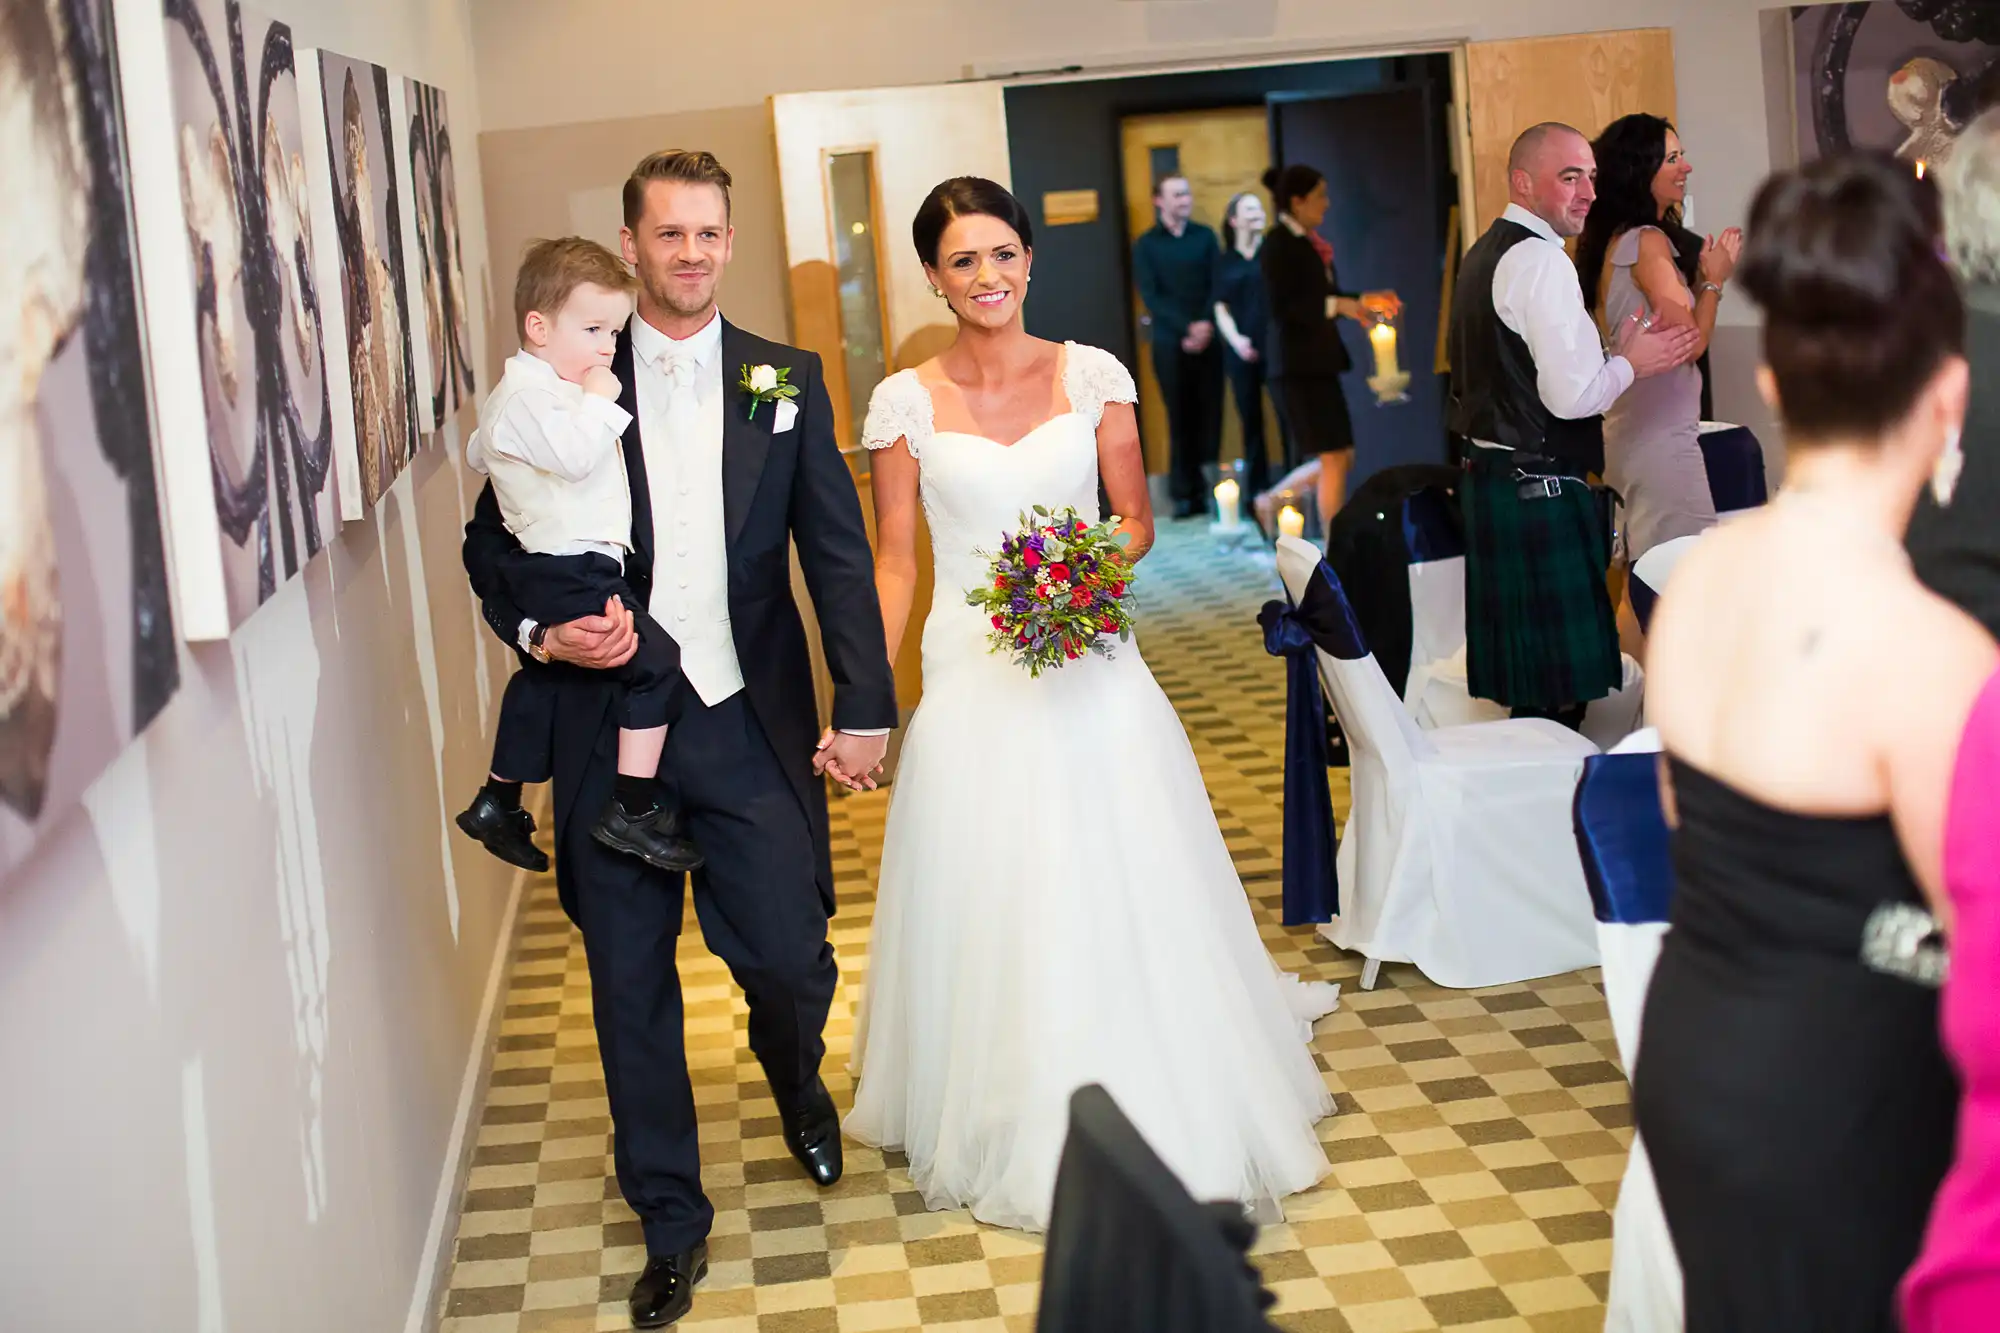 Bride and groom holding a young child, walking down a hallway lined with guests and framed pictures, smiling at the camera.